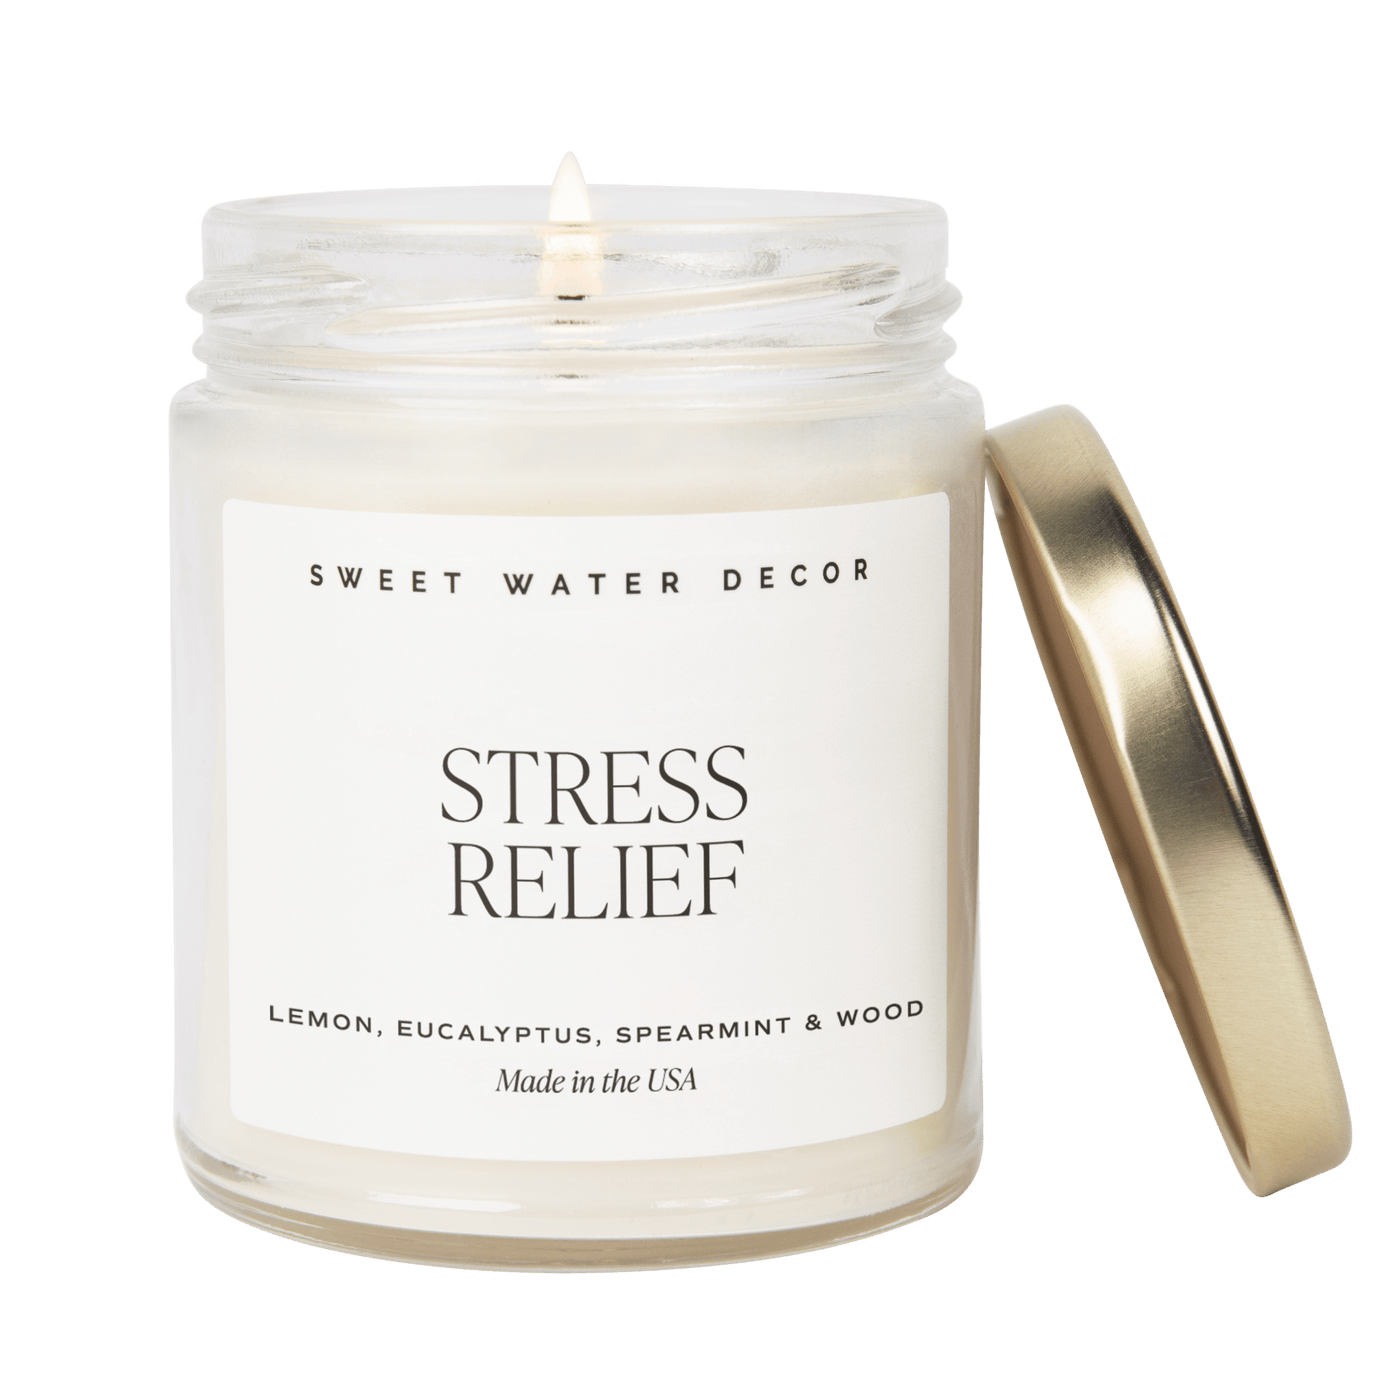 Stress Relief Soy Candle - Clear Jar - 9 oz - Sweet Water Decor - Candles